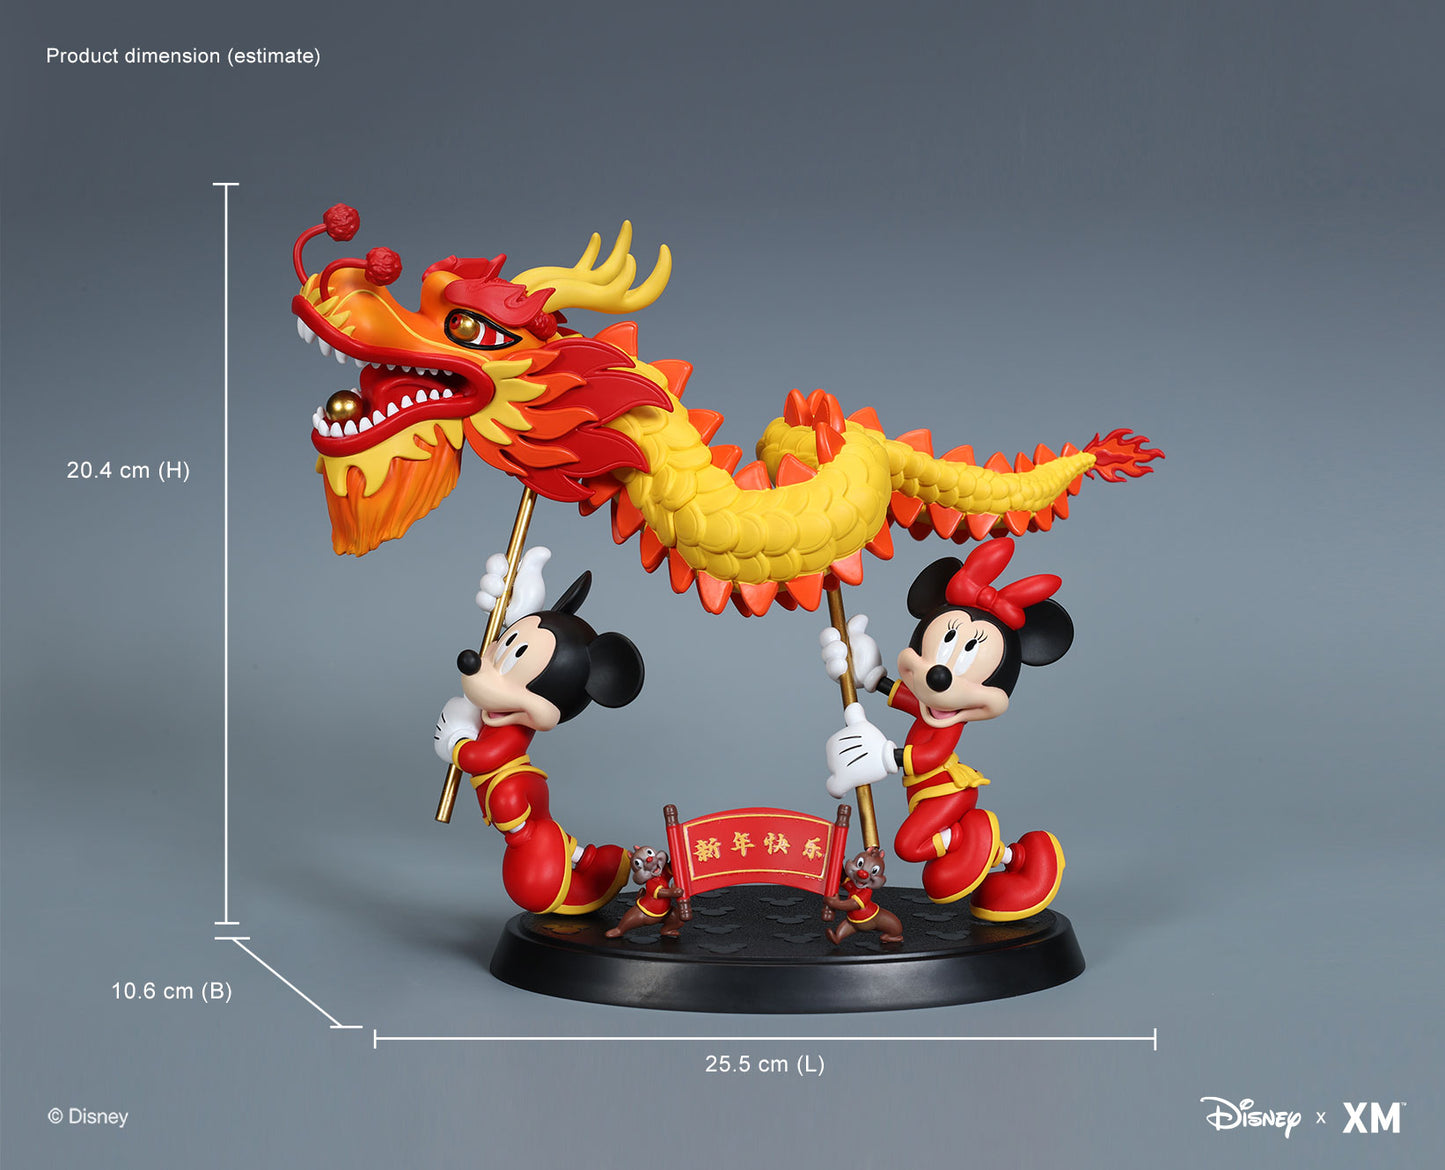 Joy of Festival - 2022 Full Set (with Mickey - Year of Tiger Full Colour)